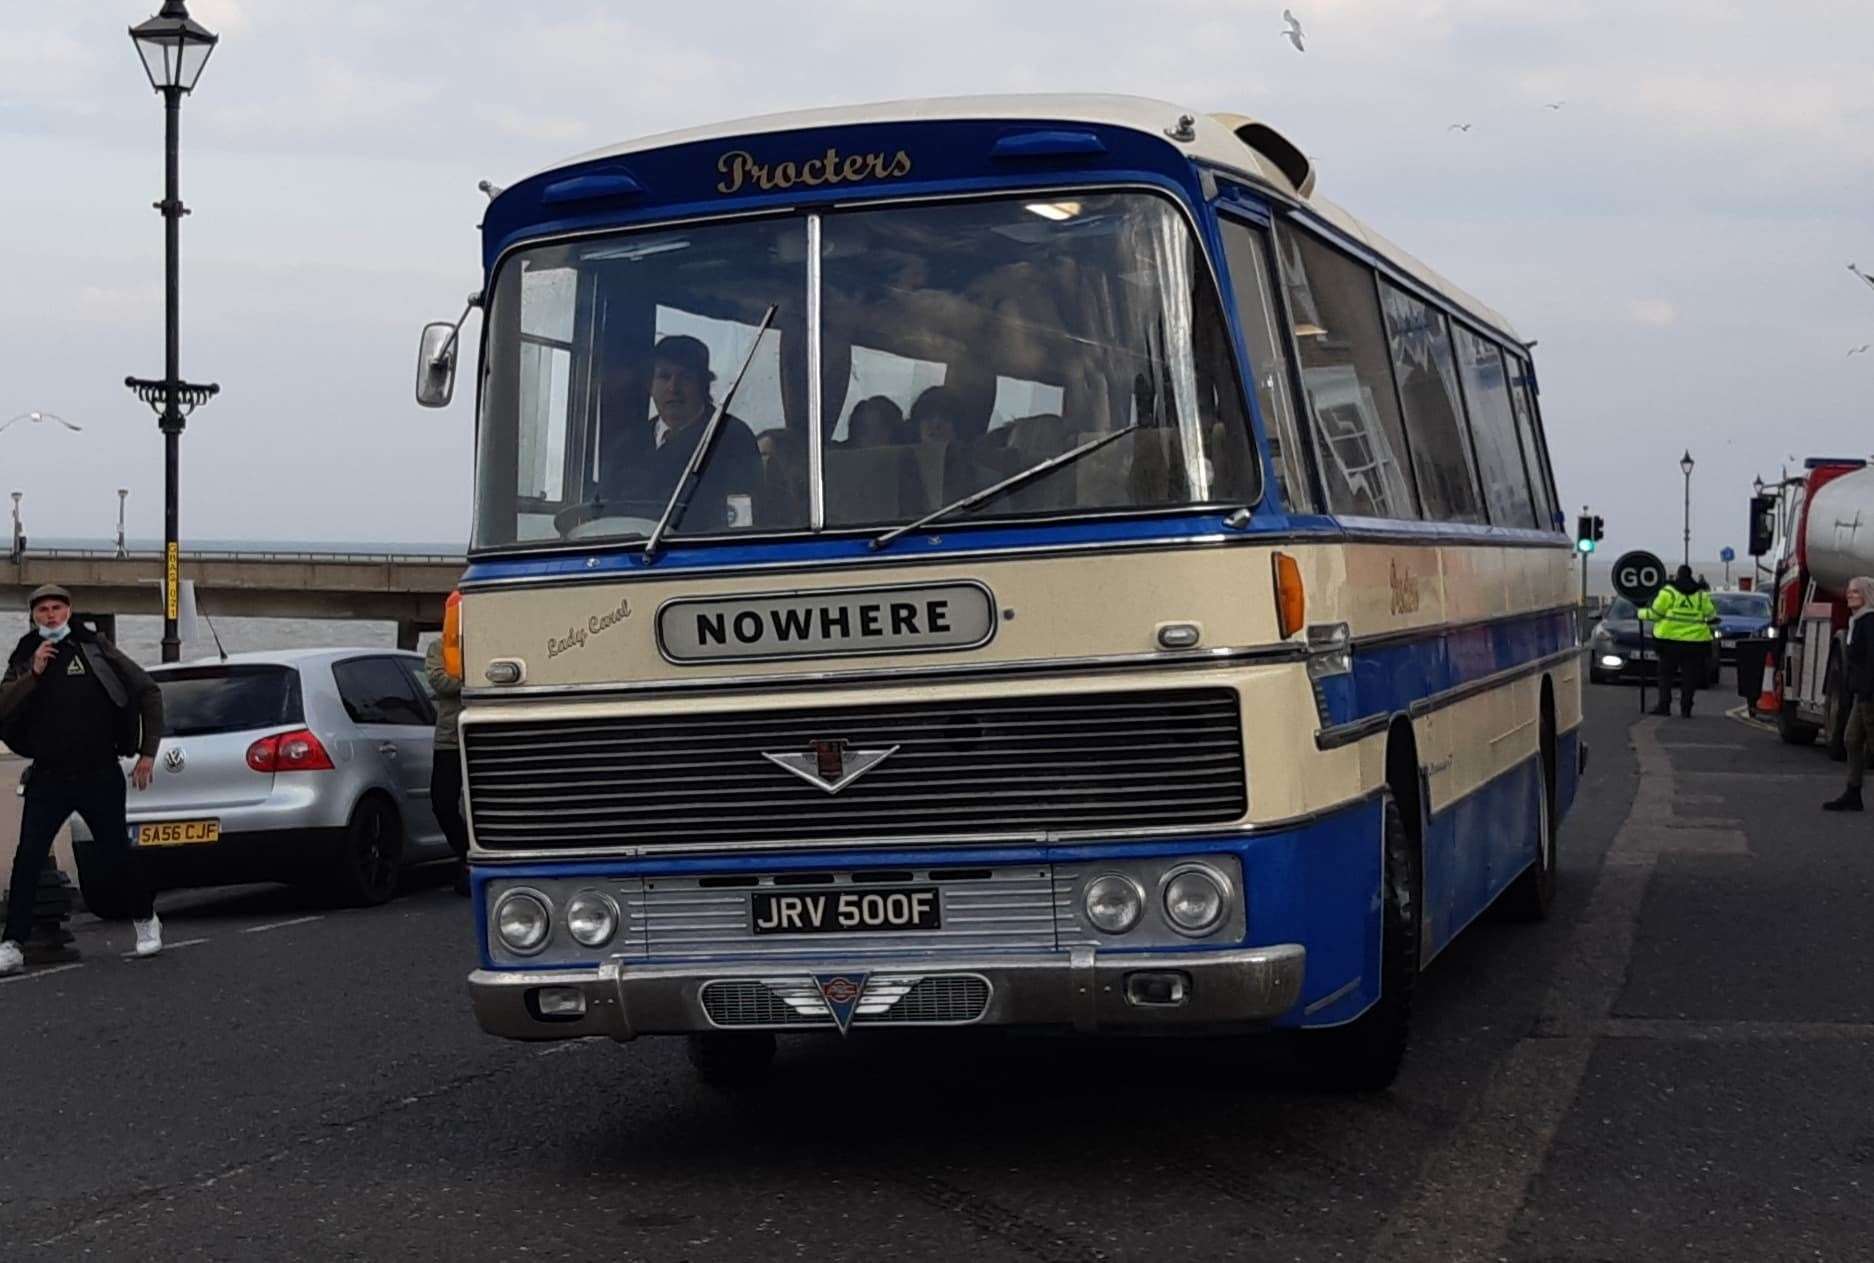 The Sex Pistols' 'Nowhere' tour bus spotted in Deal